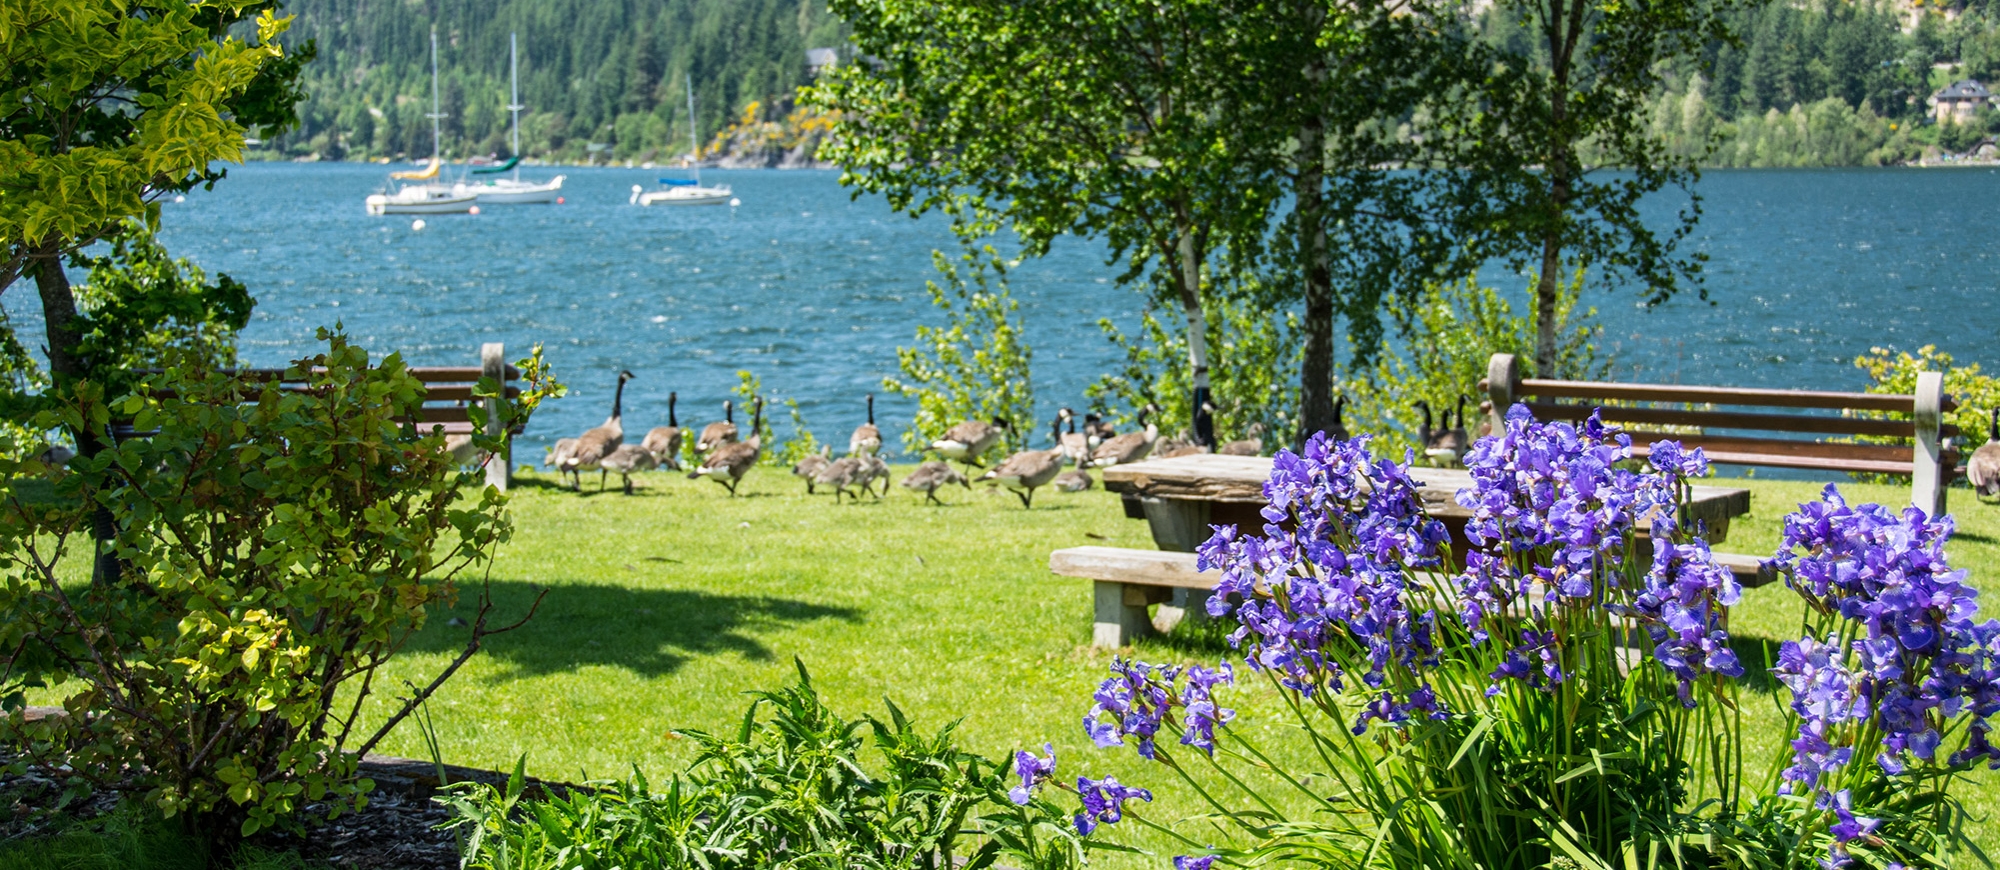 Purple flowers with Canadian Geese and Kootenay Lake in the background at Lakeside Park in Nelson, BC